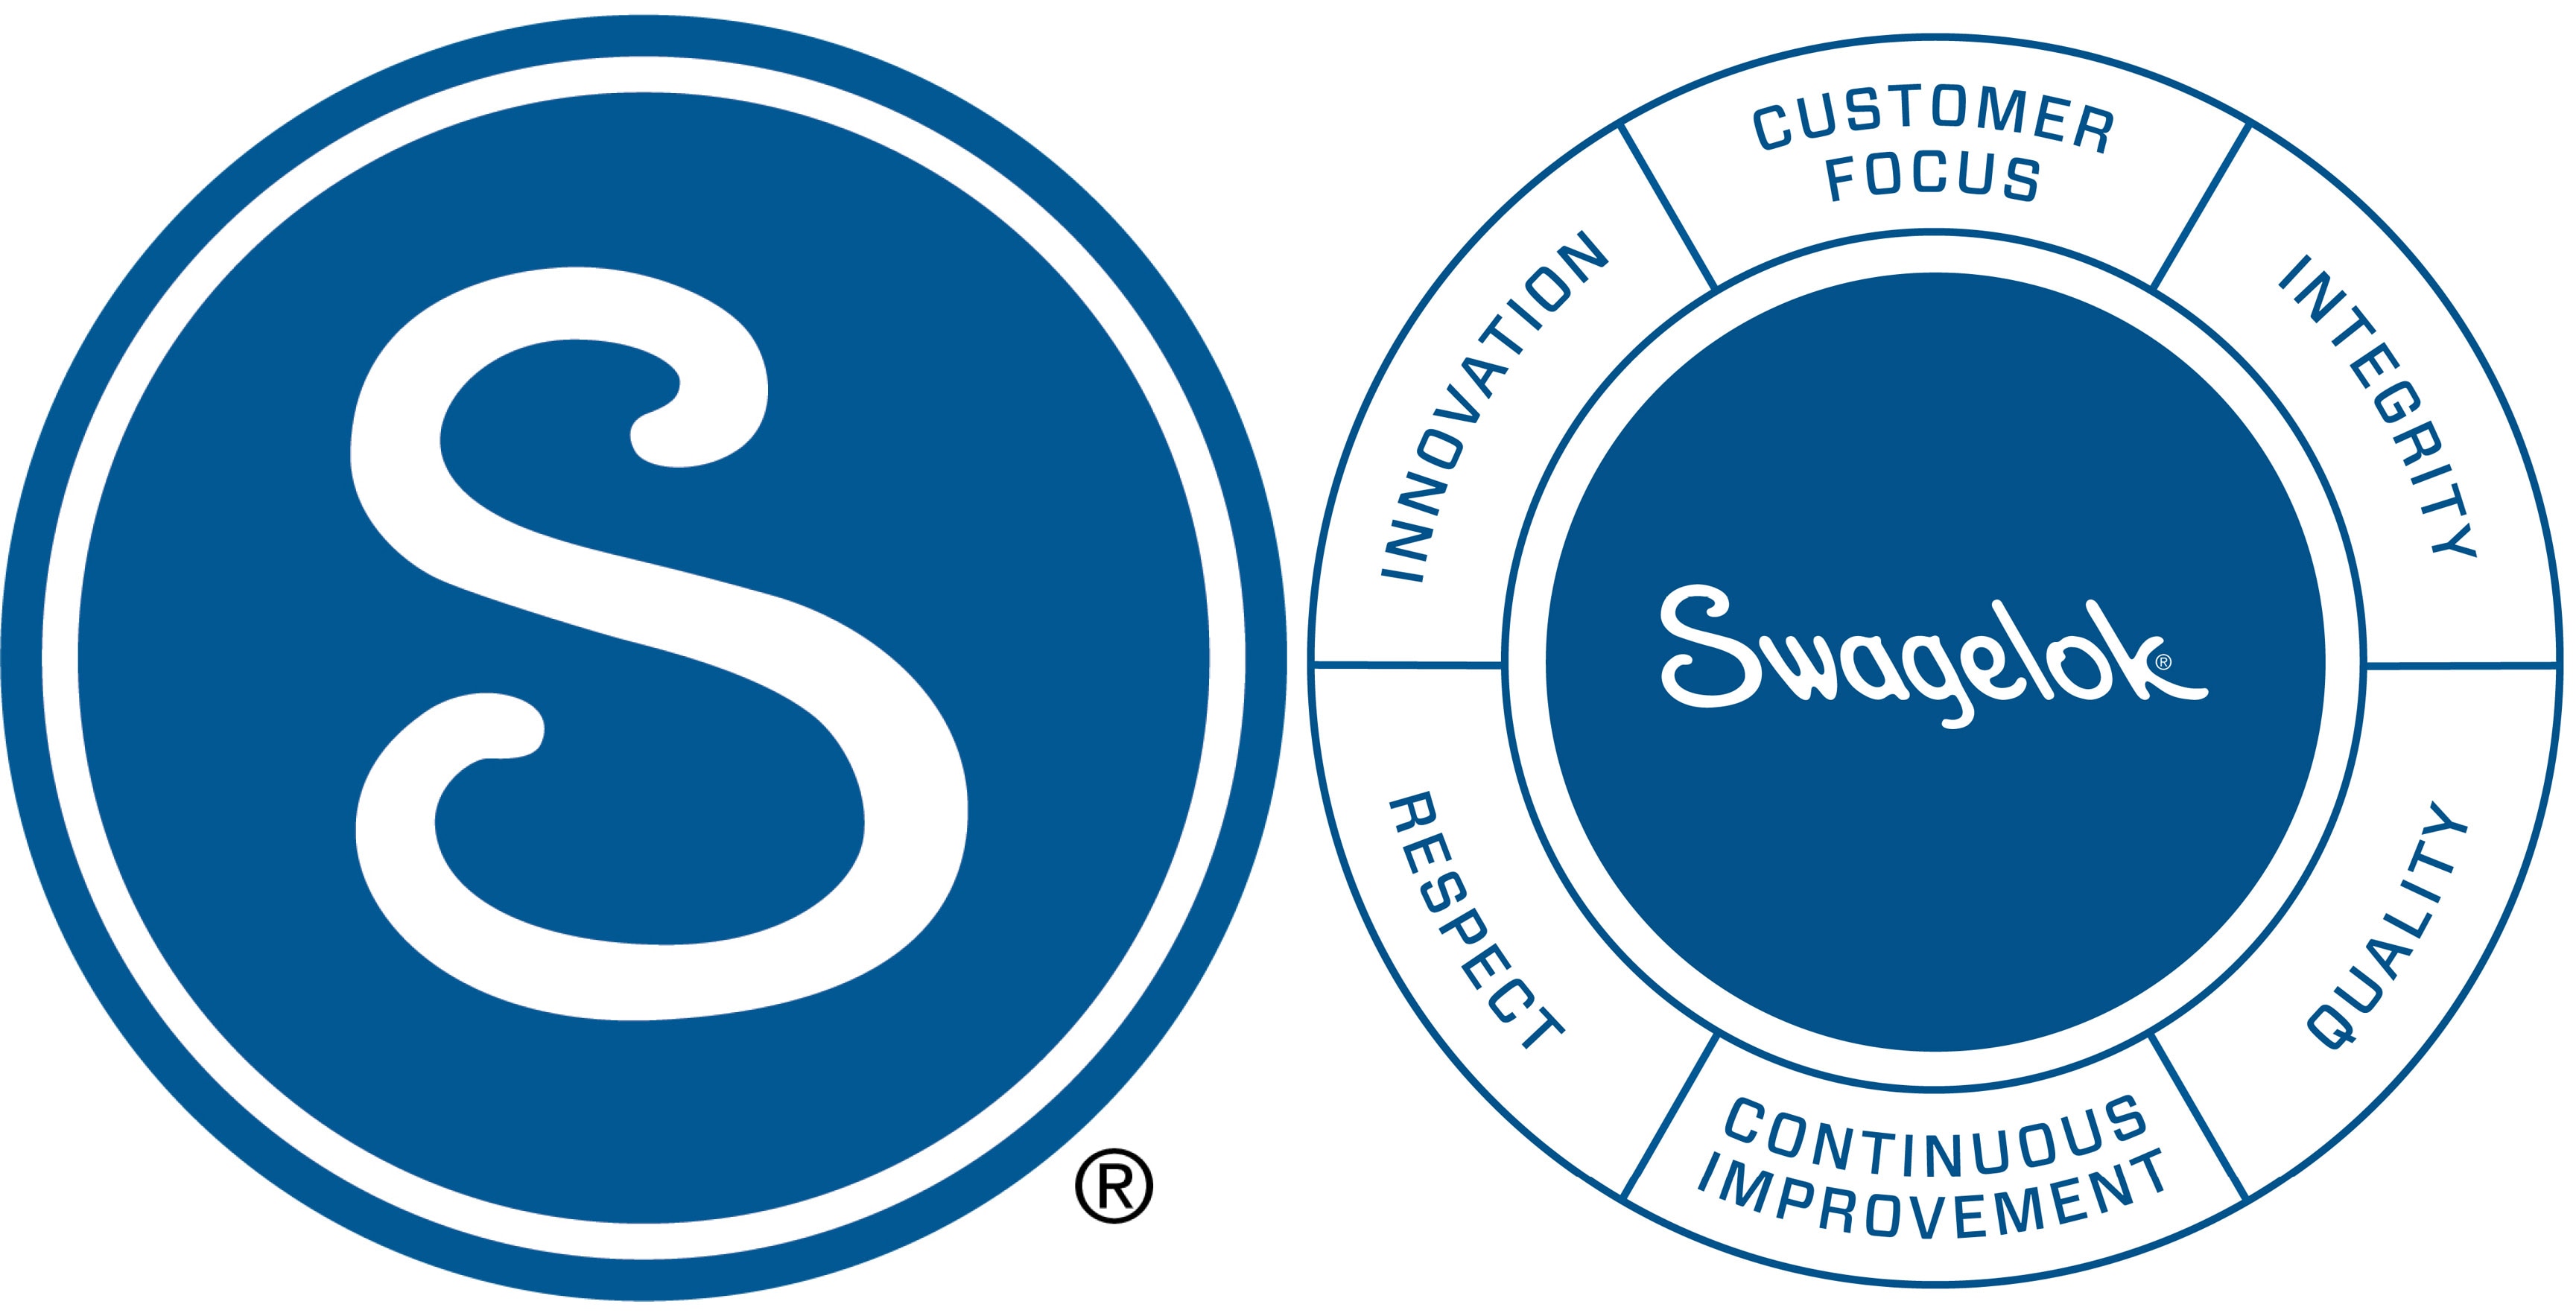 At Swagelok, our values...